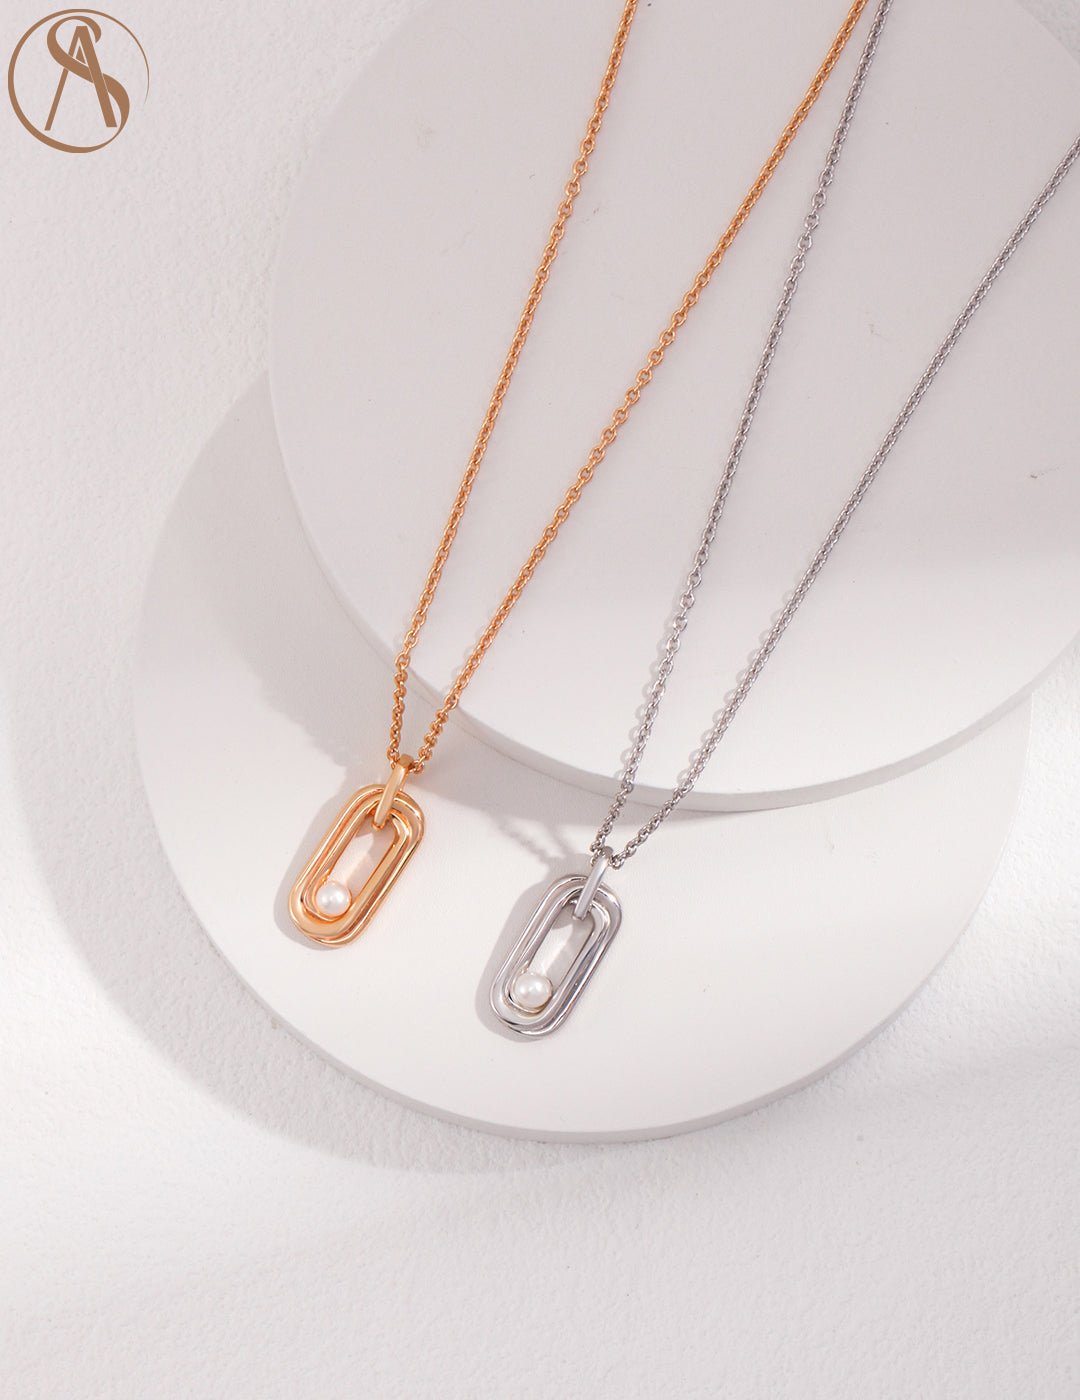 Modern Elegance: Chain Necklace with Pearl Pendant